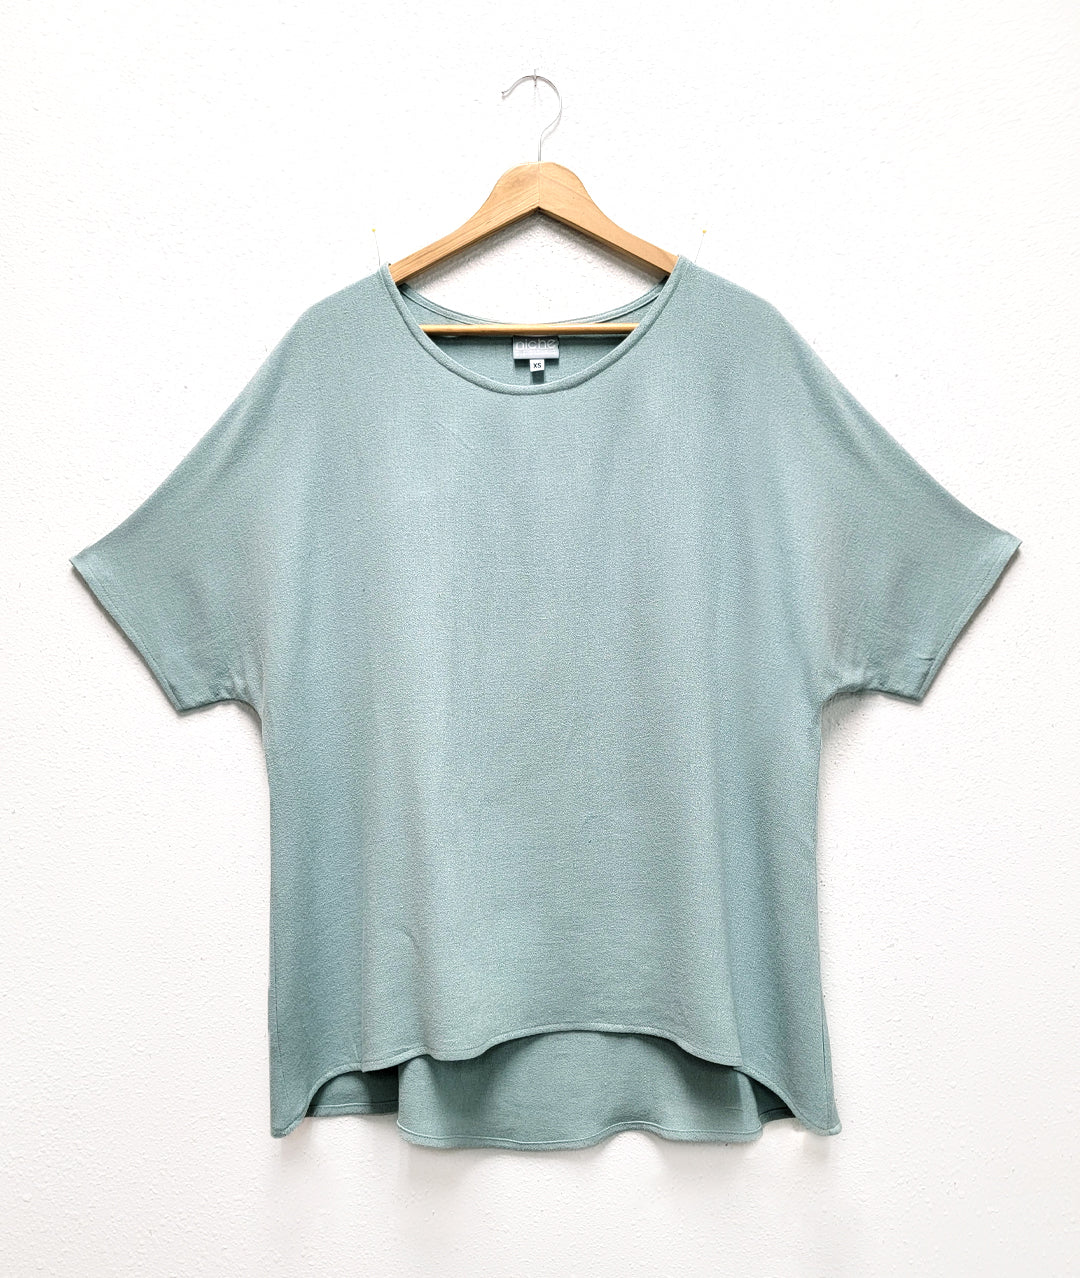 long light blue pullover tee style top